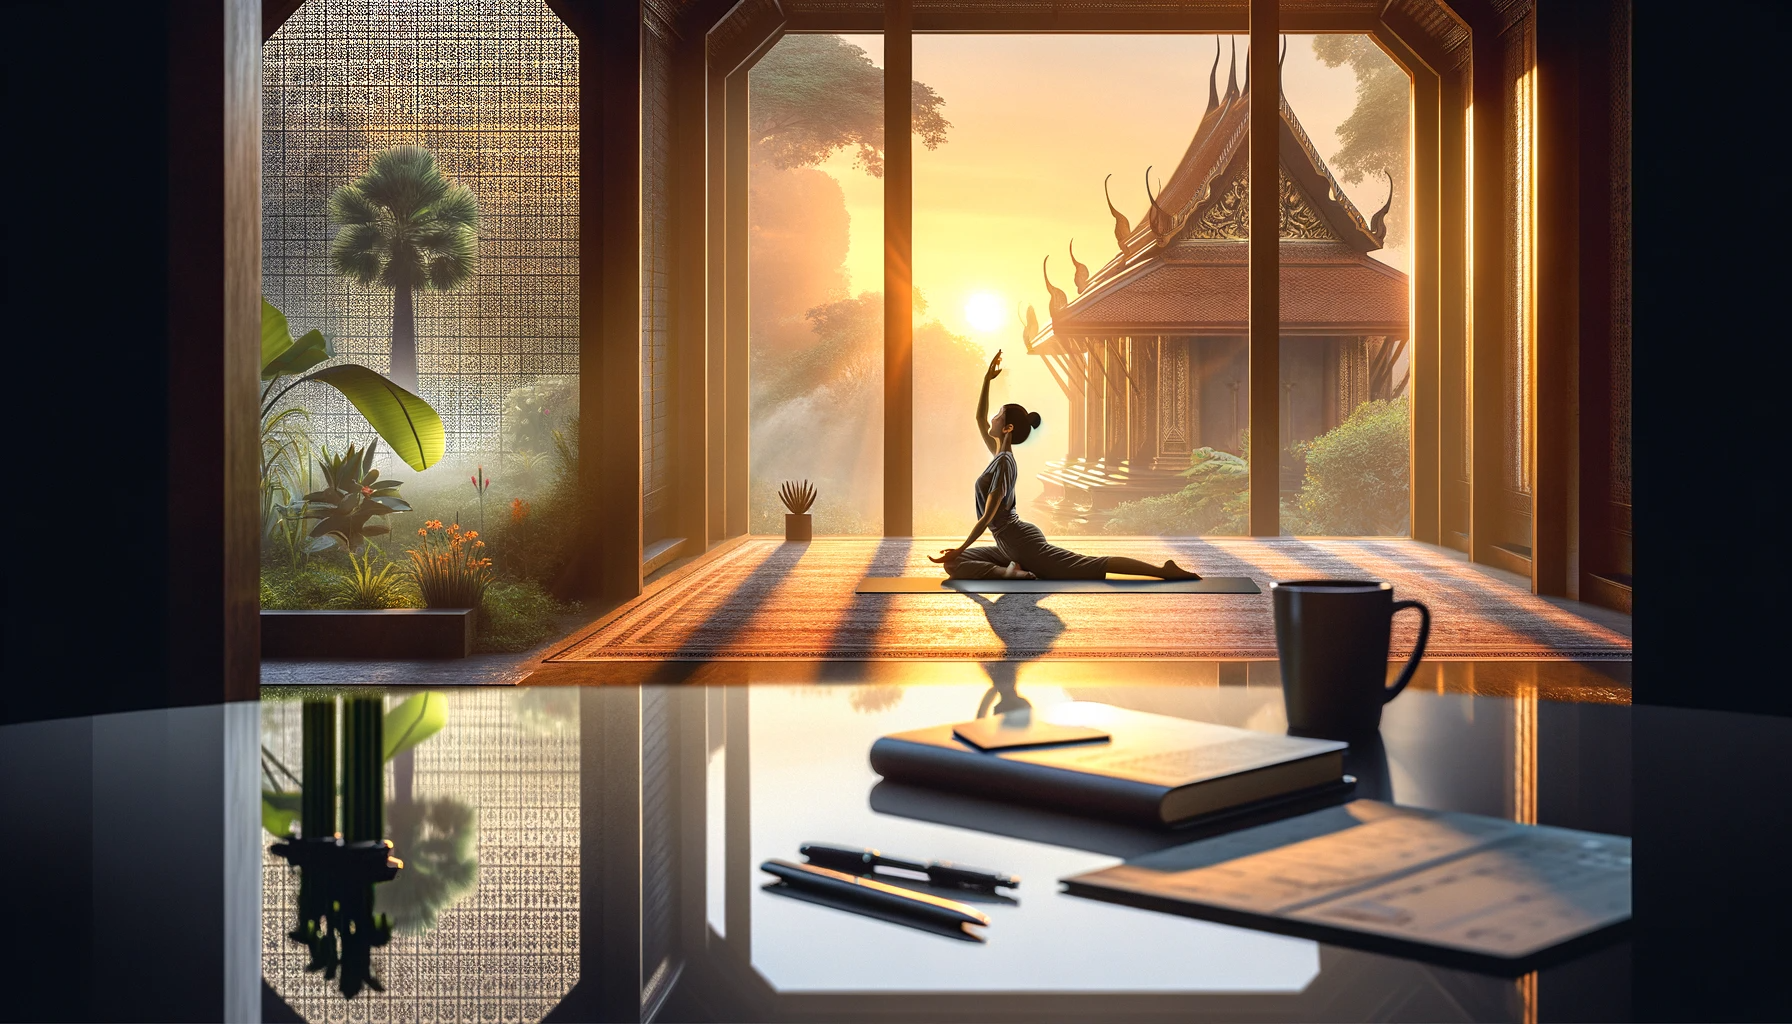 a serene home yoga space at sunrise. It features a woman mid-pose in Baby Cobra pose on a yoga mat, with a subtly placed coffee cup and planner in the room